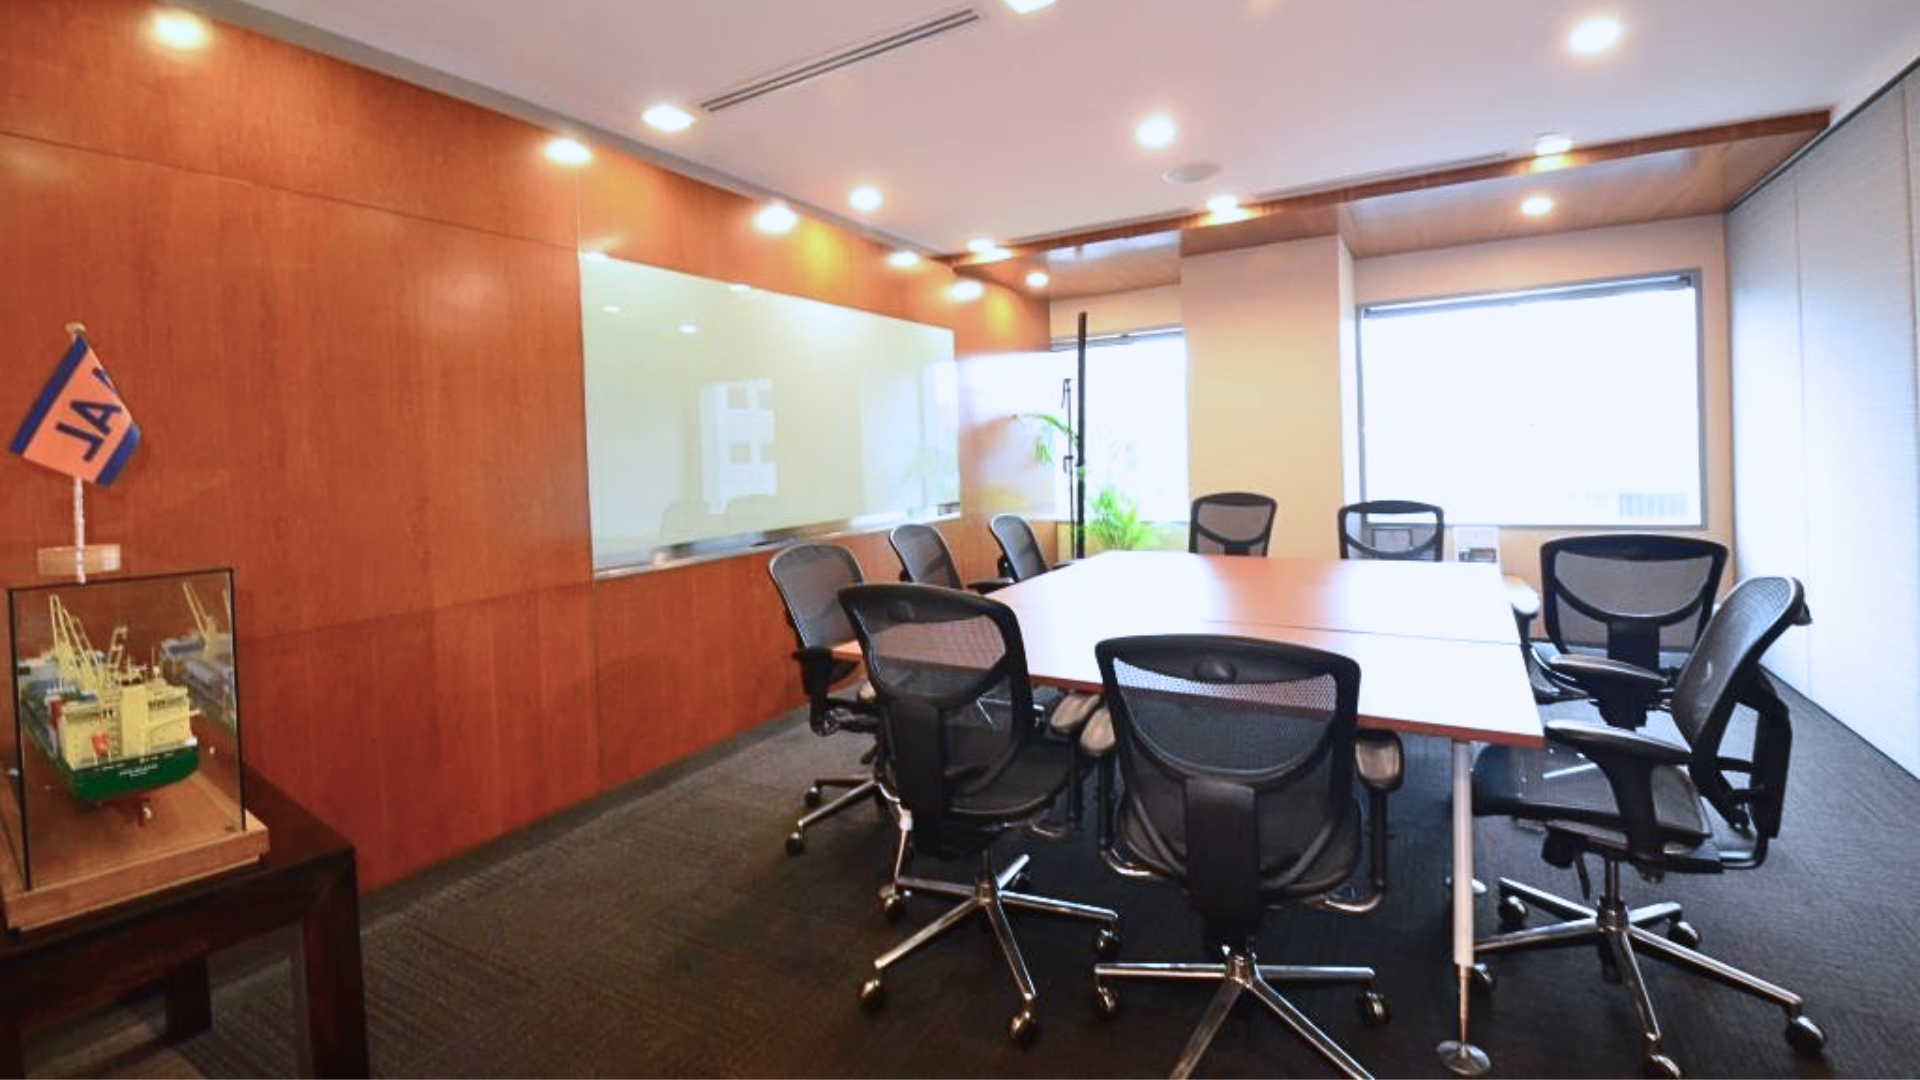 Suntec City Tower Singapore Commercial Properties office meeting room